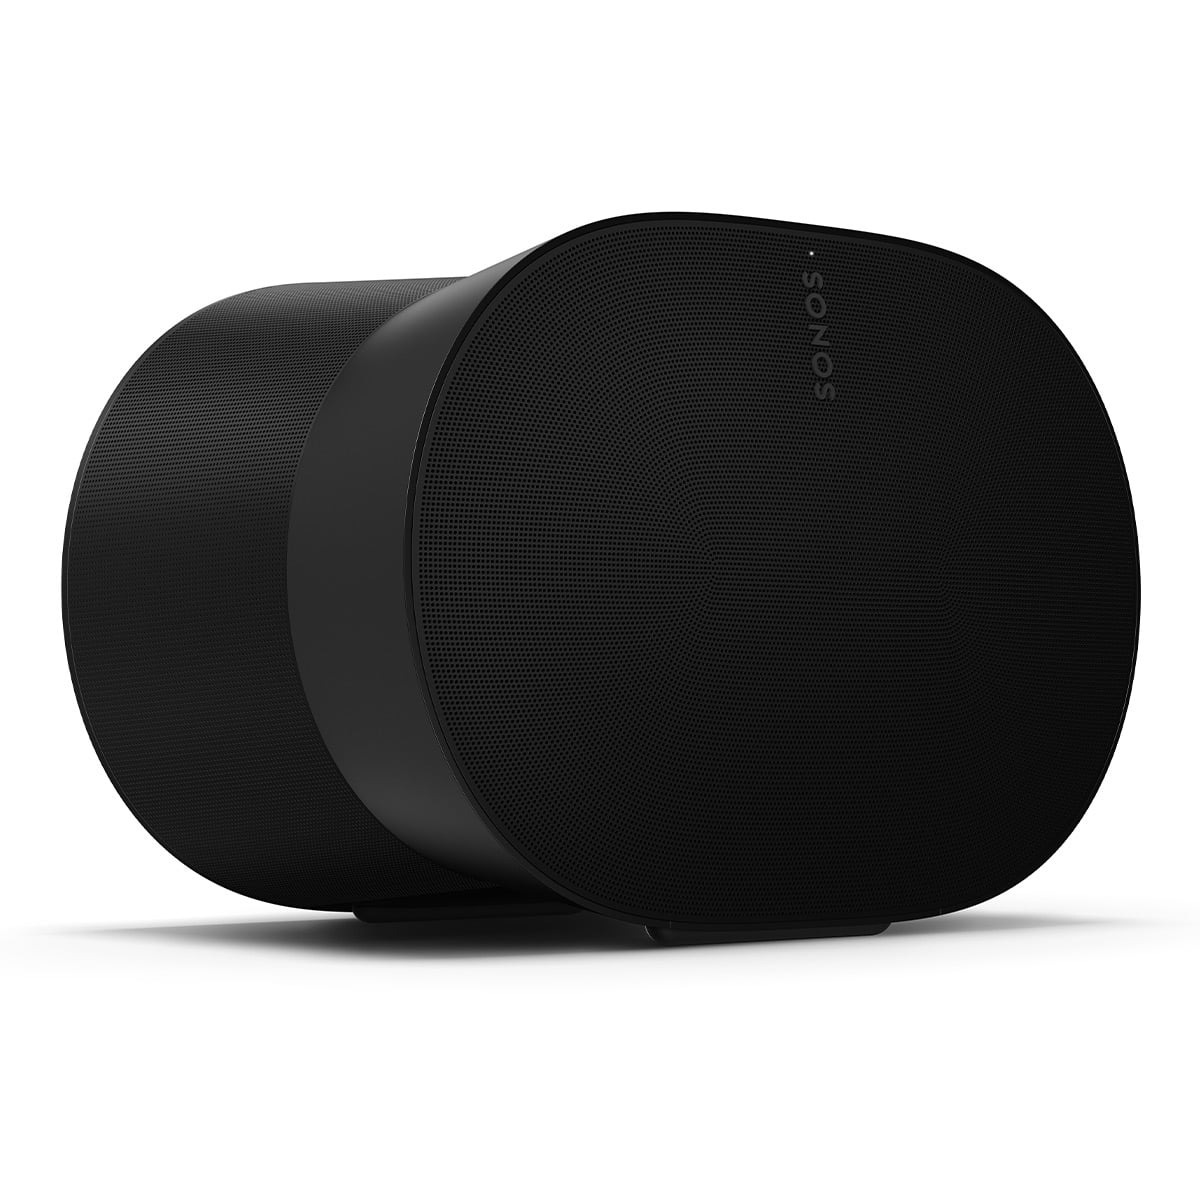 folder Integrere Bunke af Sonos Era 300 Voice-Controlled Wireless Smart Speaker with Bluetooth,  Trueplay Acoustic Tuning Technology, & Voice Control Built-In (Black) -  Walmart.com